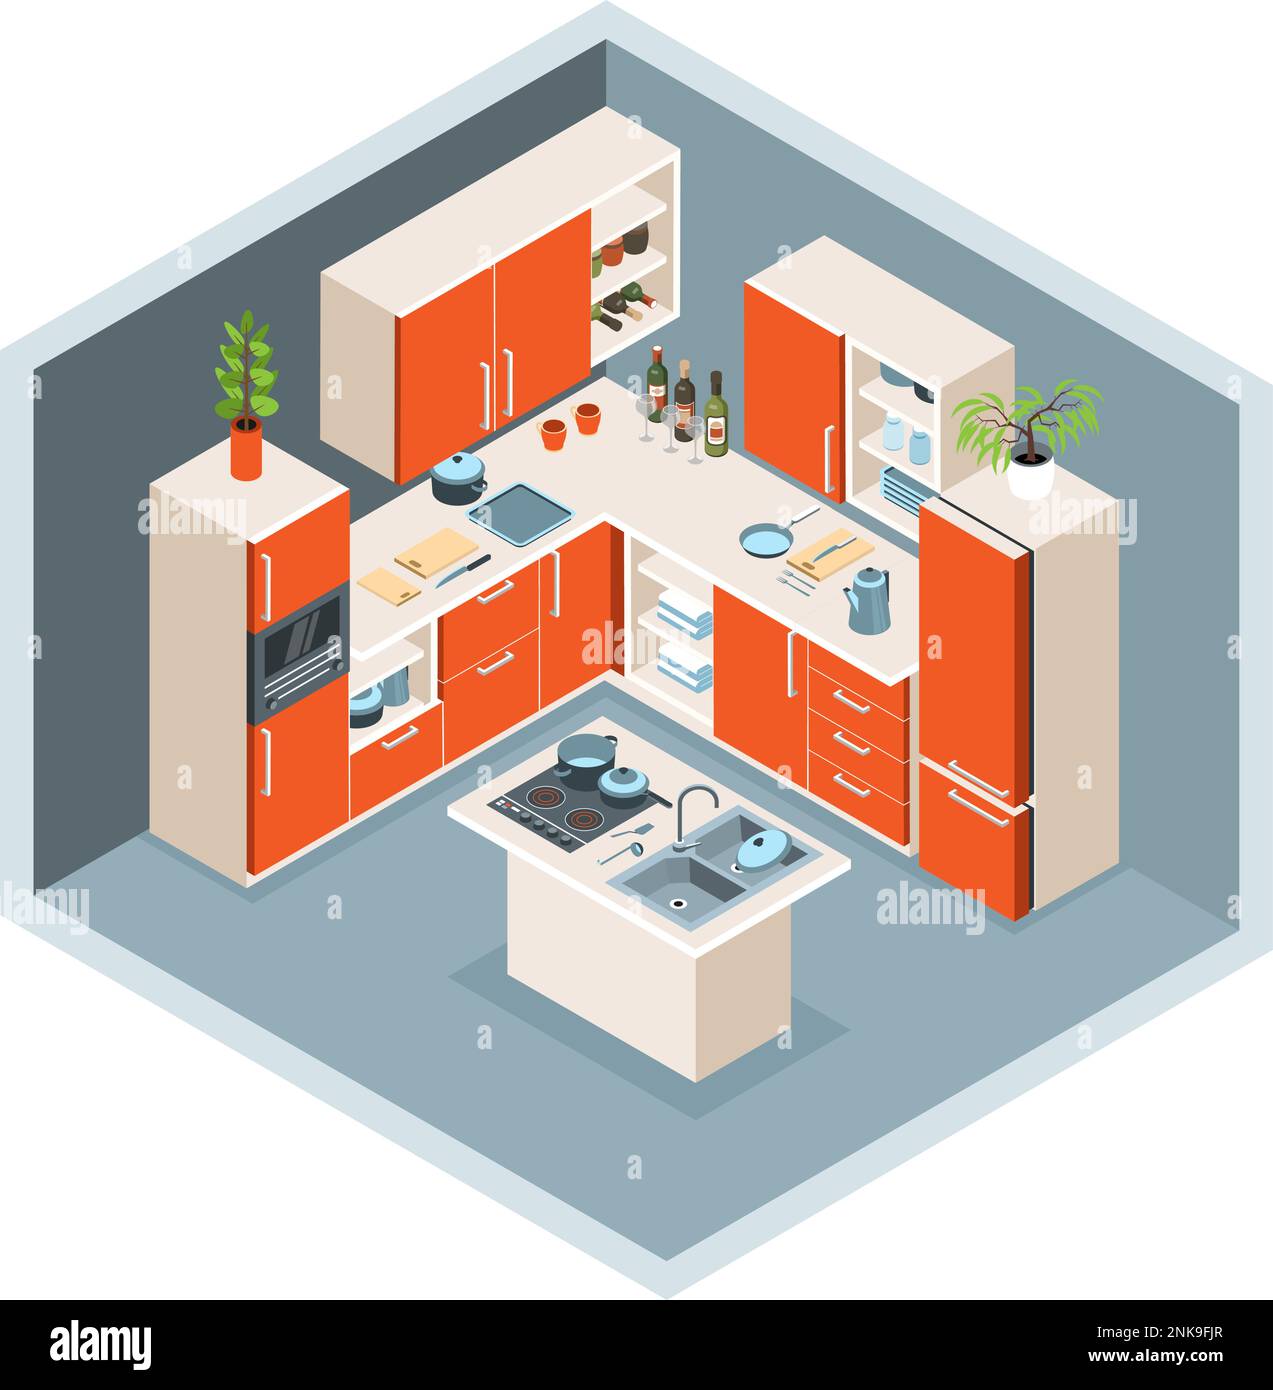 Isometric kitchen interior composition with corner view of kitchen designer furniture colored in orange with sink vector illustration Stock Vector